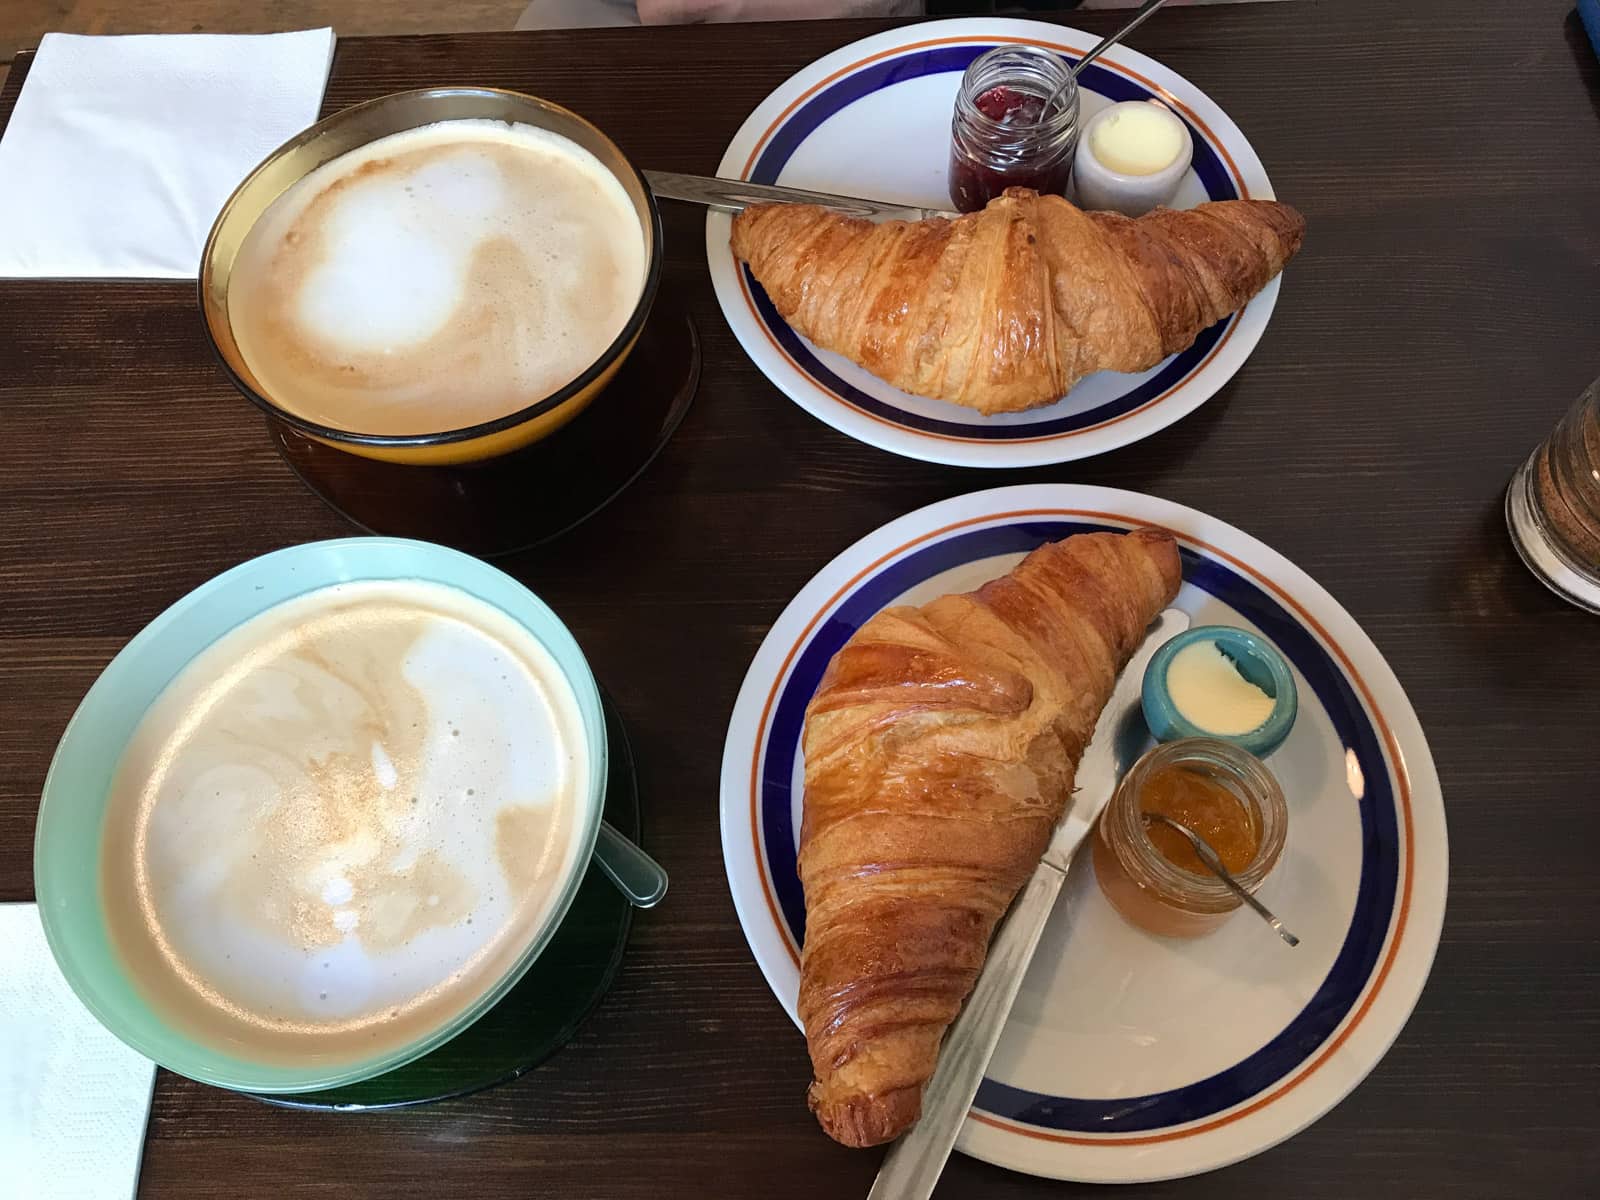 A table setting with two cups of coffee and two white plates with croissants and jam